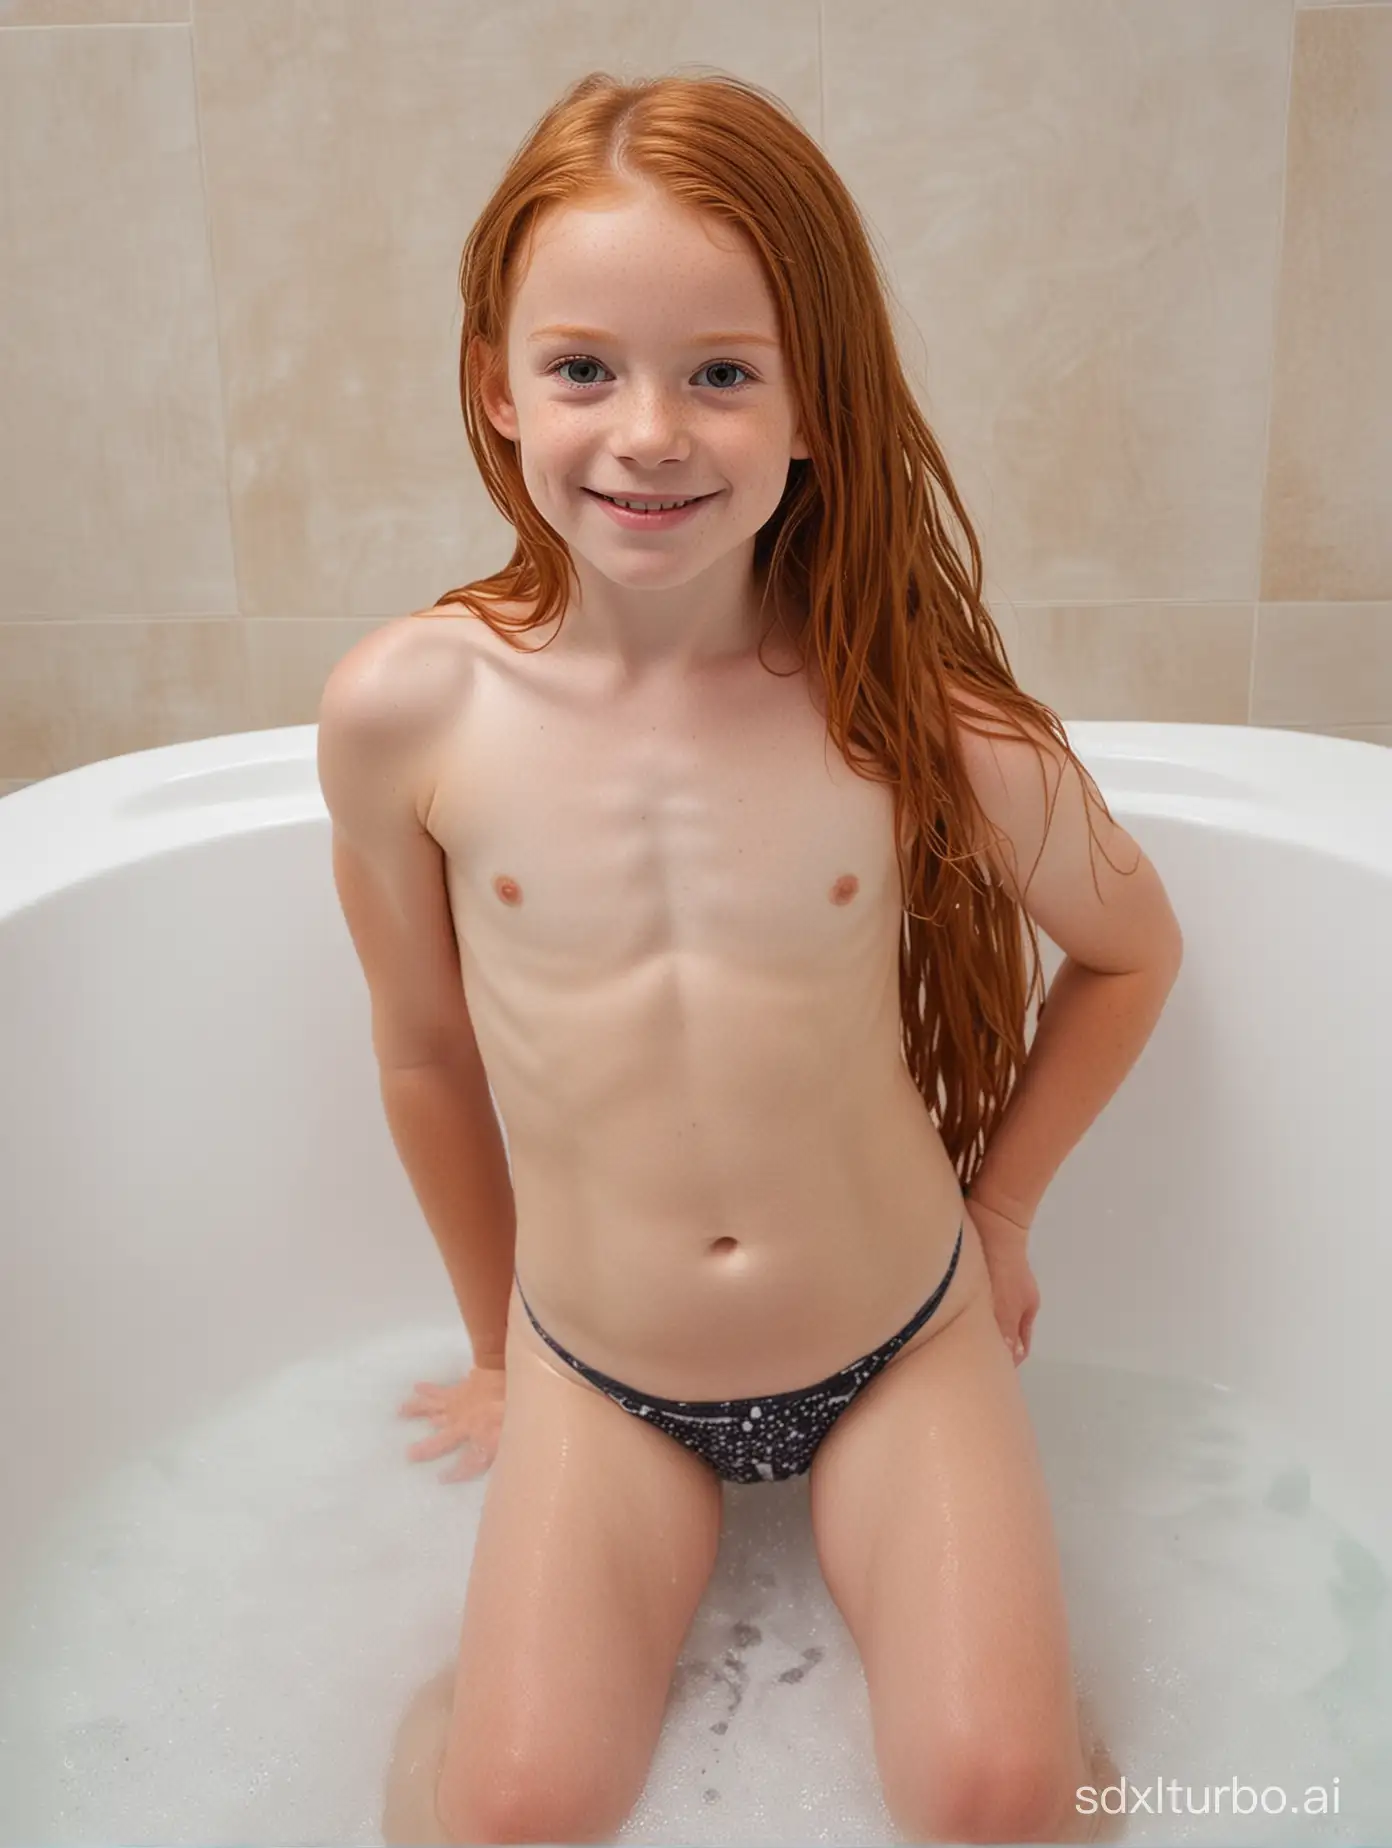 8 years old girl, flat chested, long ginger hair, muscular abs, showing her belly, bathing